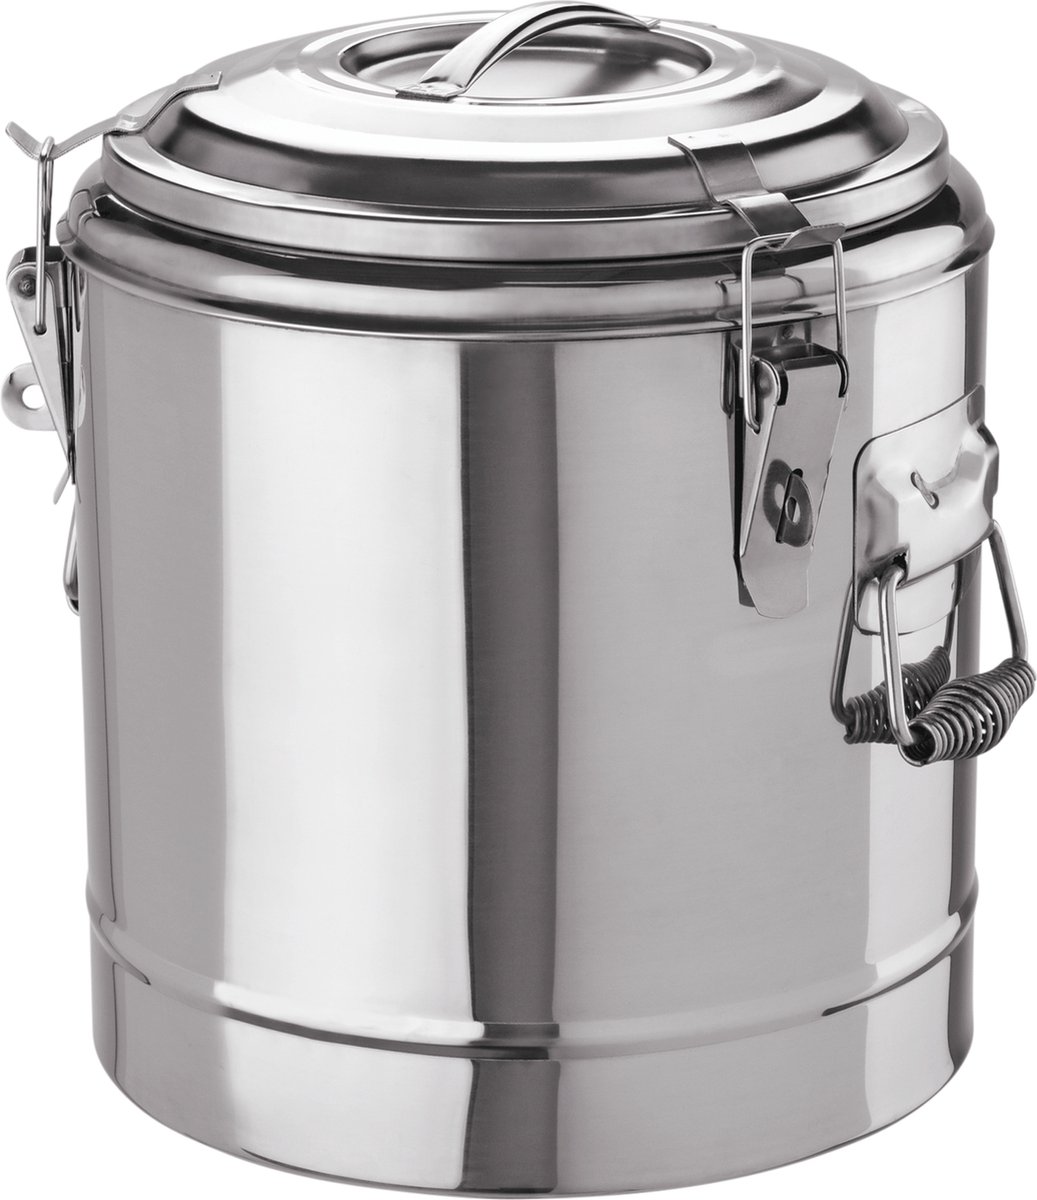 Thermos container, transportcontainer - 35 L, 5.75 kg, chroomnikkelstaal